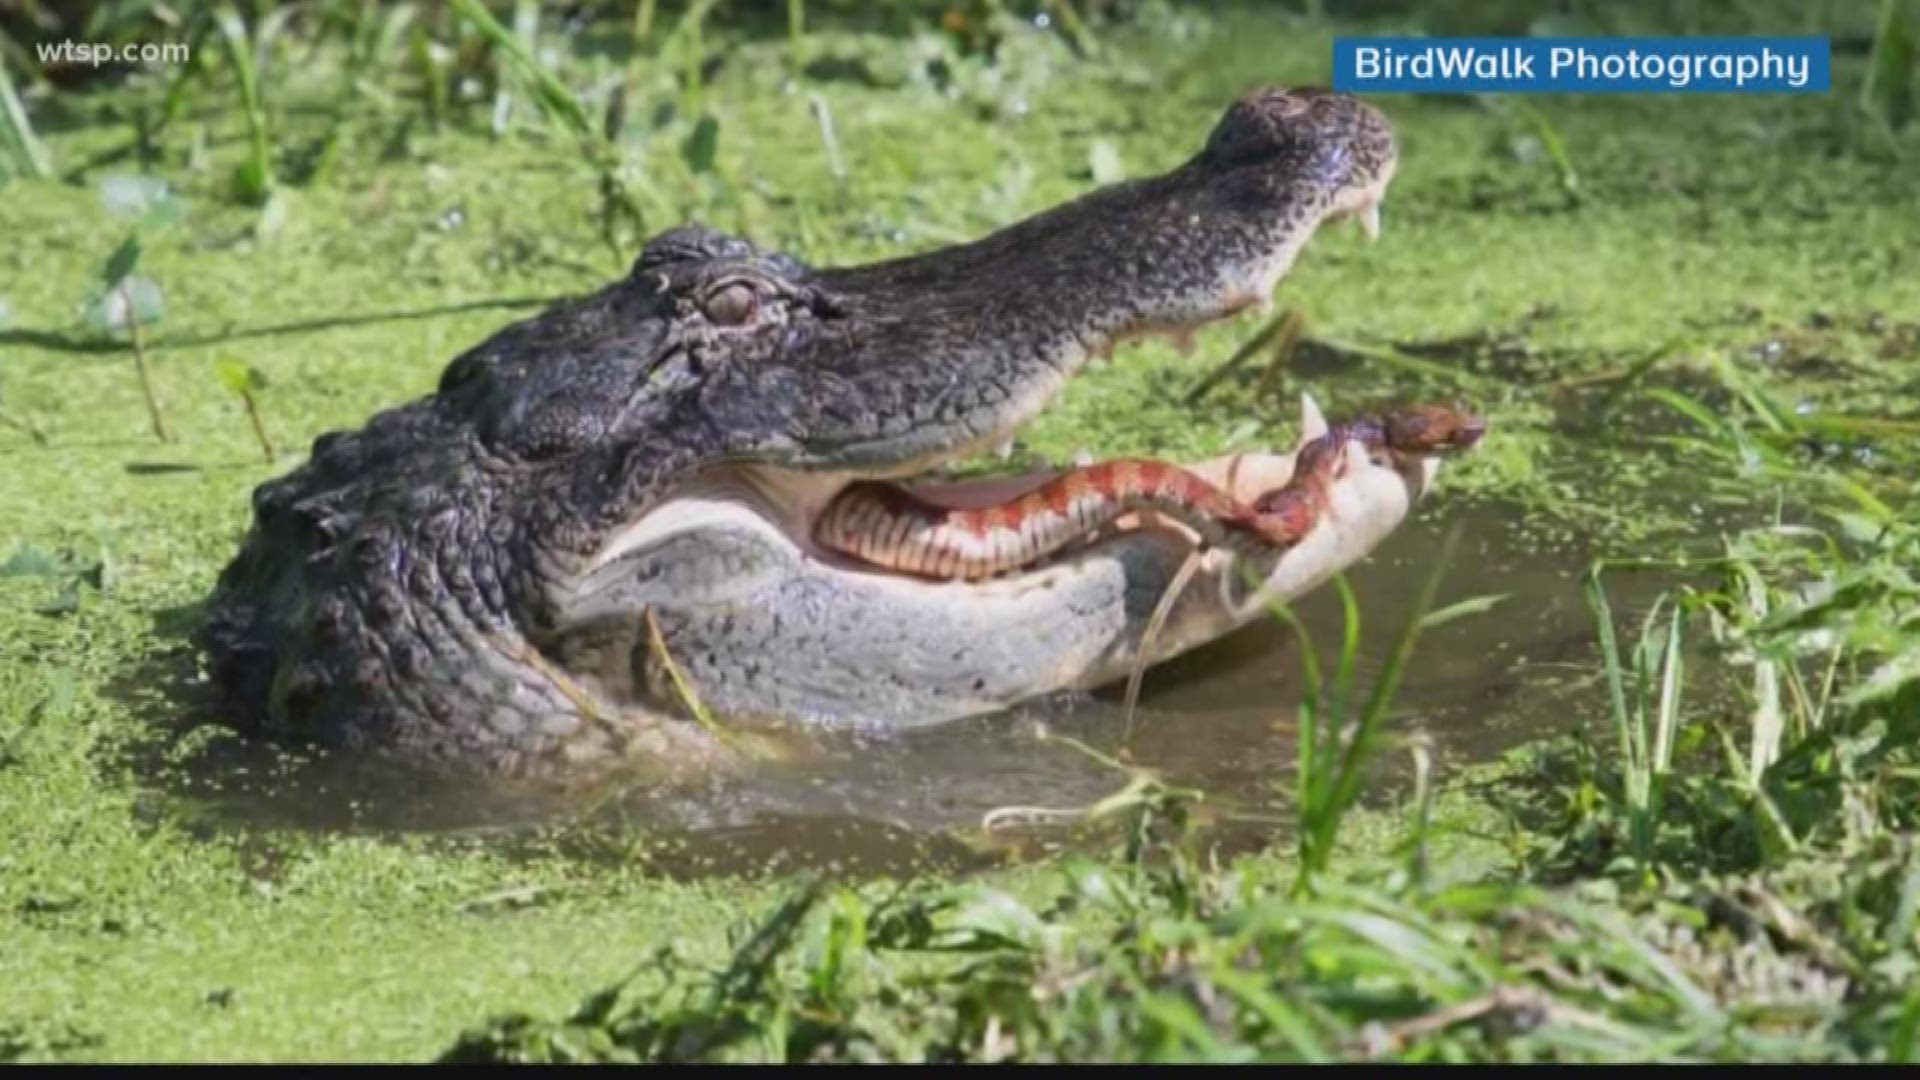 It was Florida nature at it’s finest Saturday at Circle B Bar Reserve in Lakeland.

Husband and wife photography duo Jesse and Linda Waring with BirdWalk Photography snapped a photo of a snake trying to slither its way out of the jaws of an alligator.